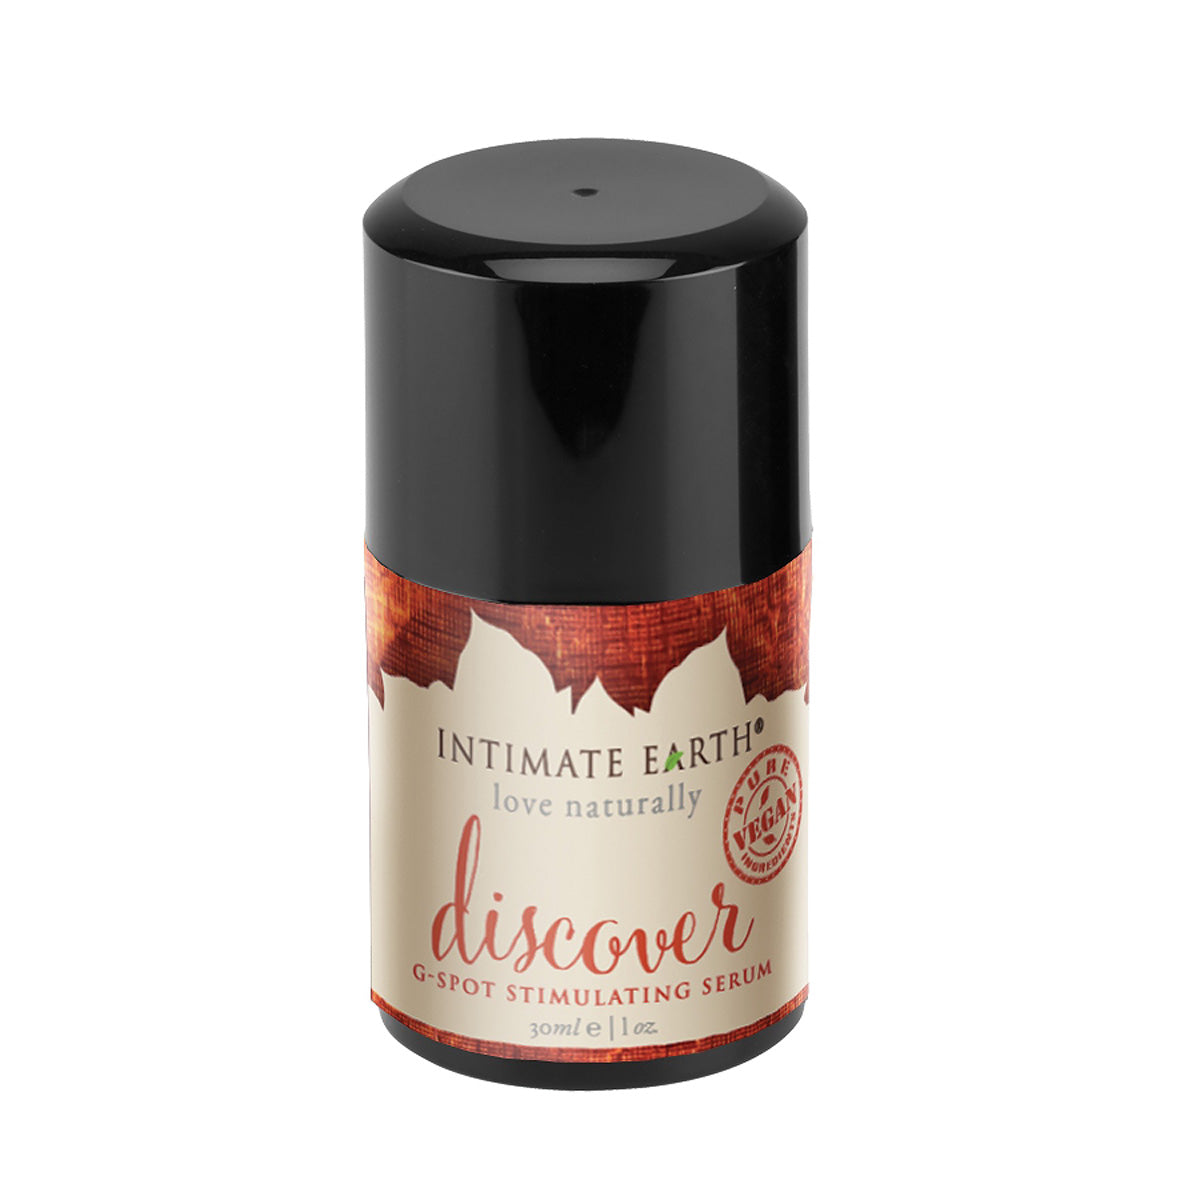 Intimate Earth Discover G-Spot Gel Lubricant 1oz